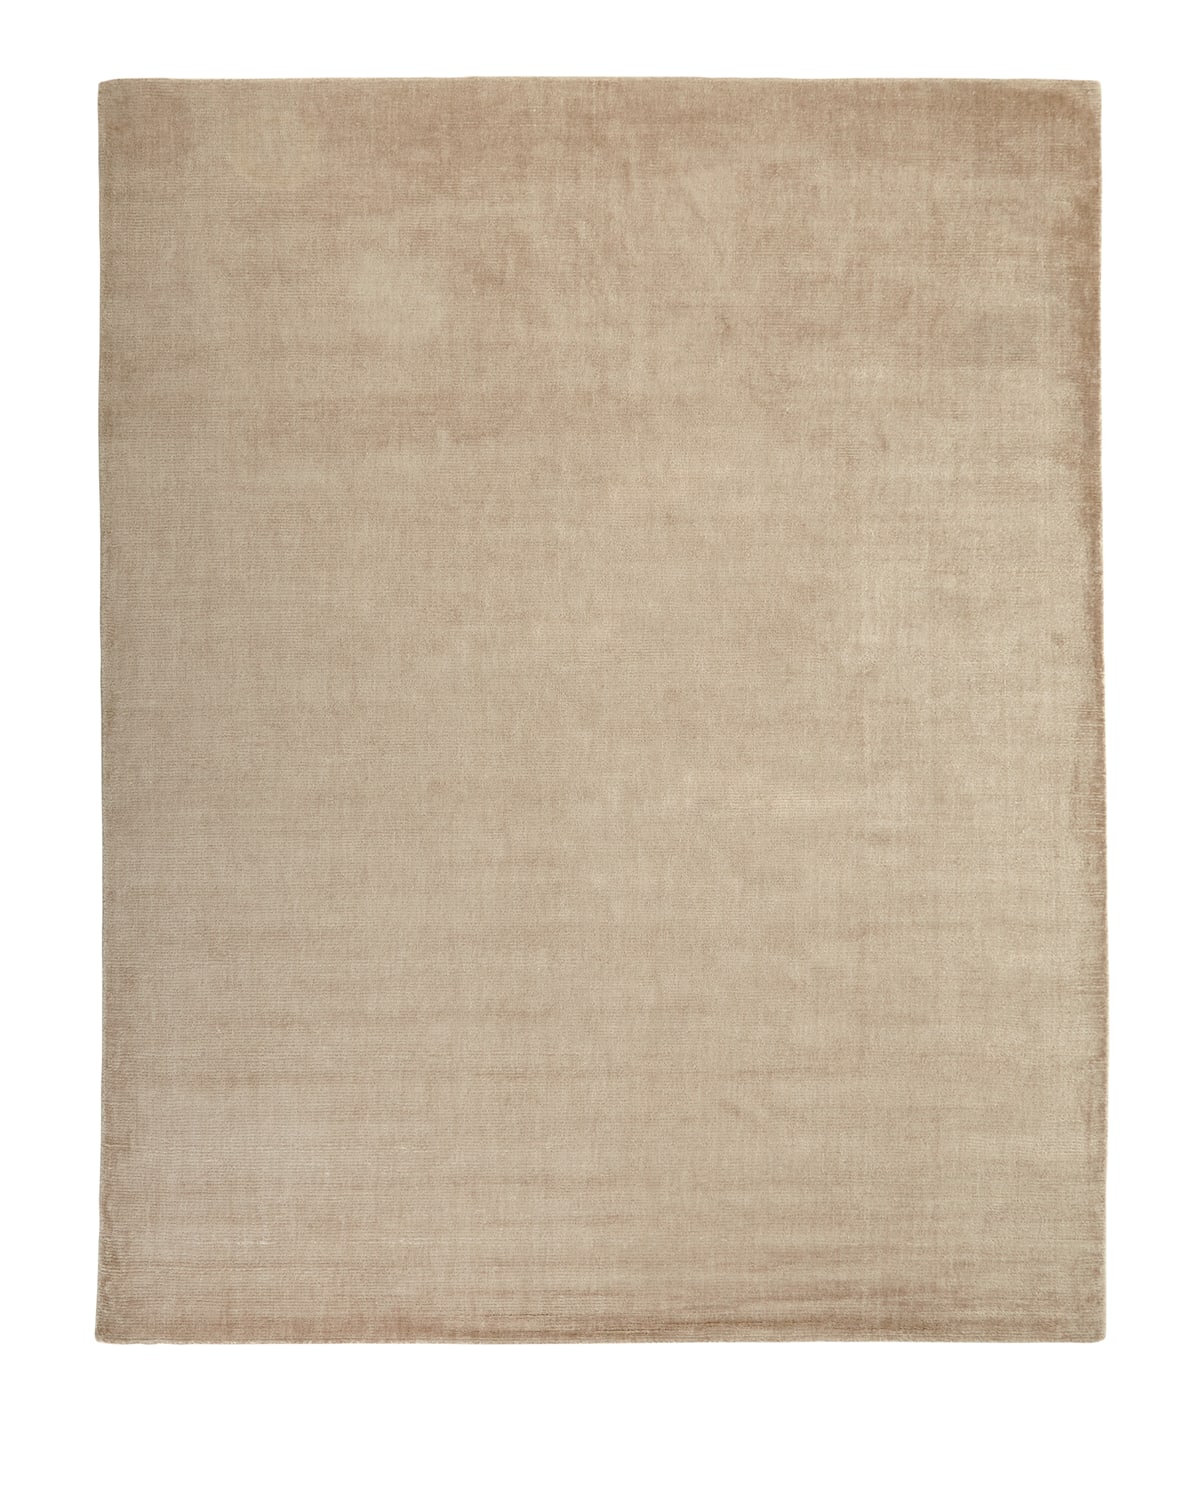 Exquisite Rugs Rockingham Hand-loomed Rug, 8' X 10' In Neutral